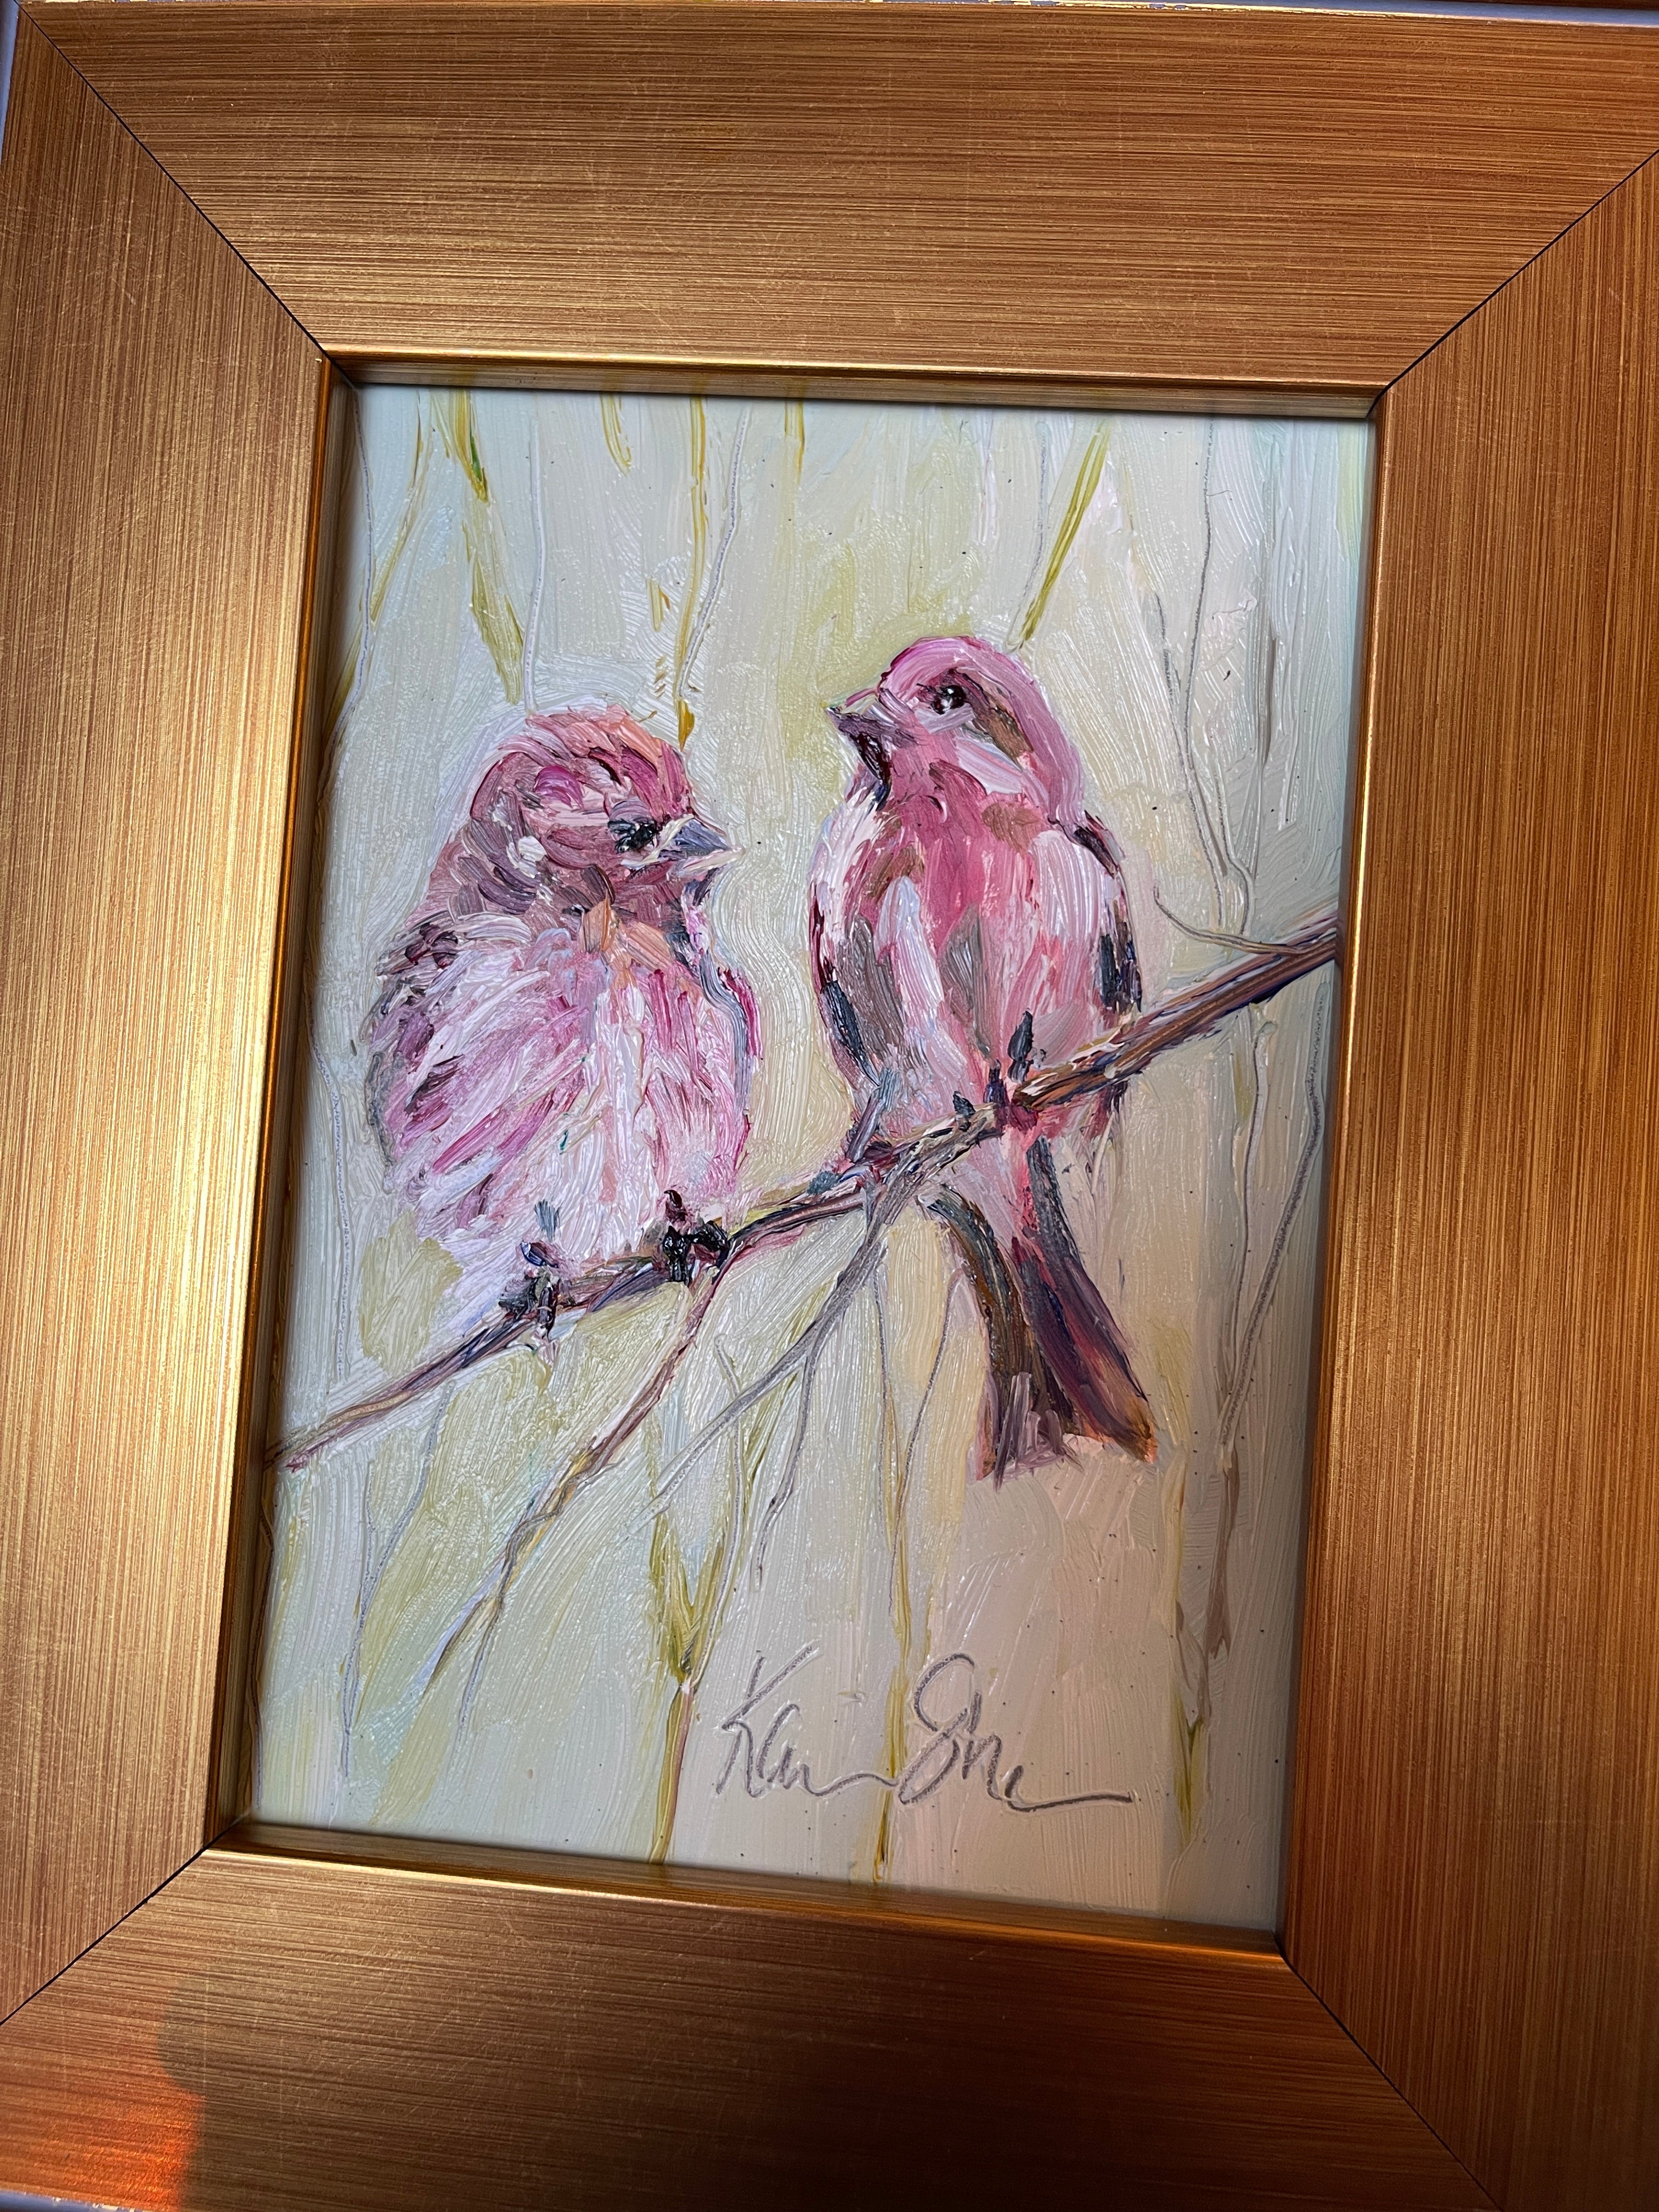 "Purple Finches" by Karin Sheer